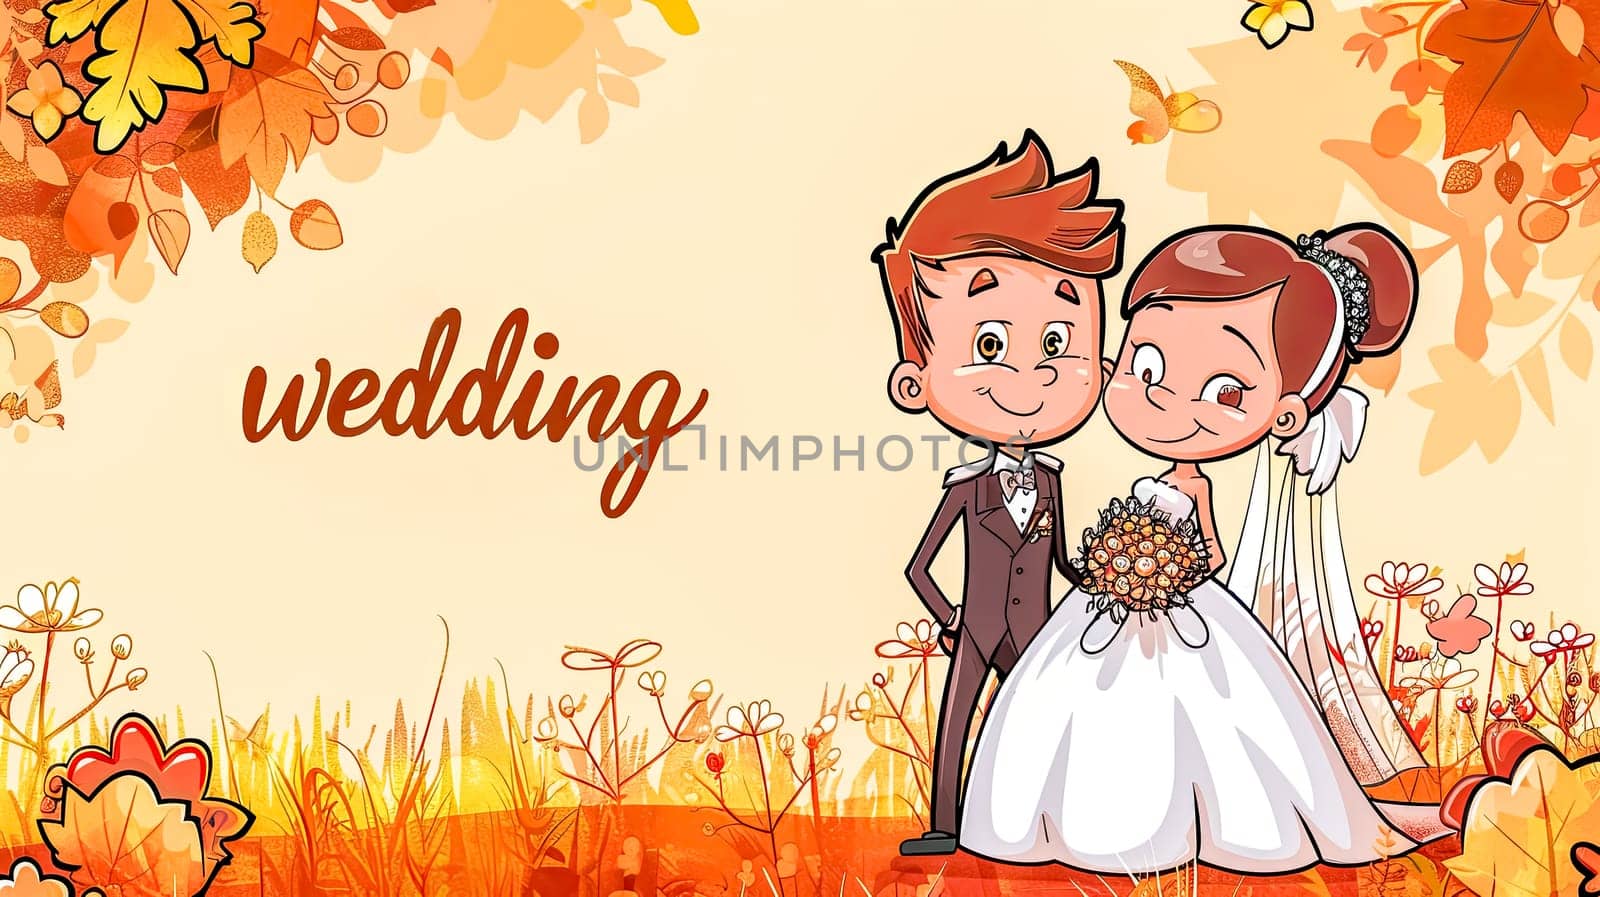 Romantic autumn wedding invitation background with cute cartoon couple illustration, fall leaves, seasonal flowers, and orange foliage for a celebration of love and marriage